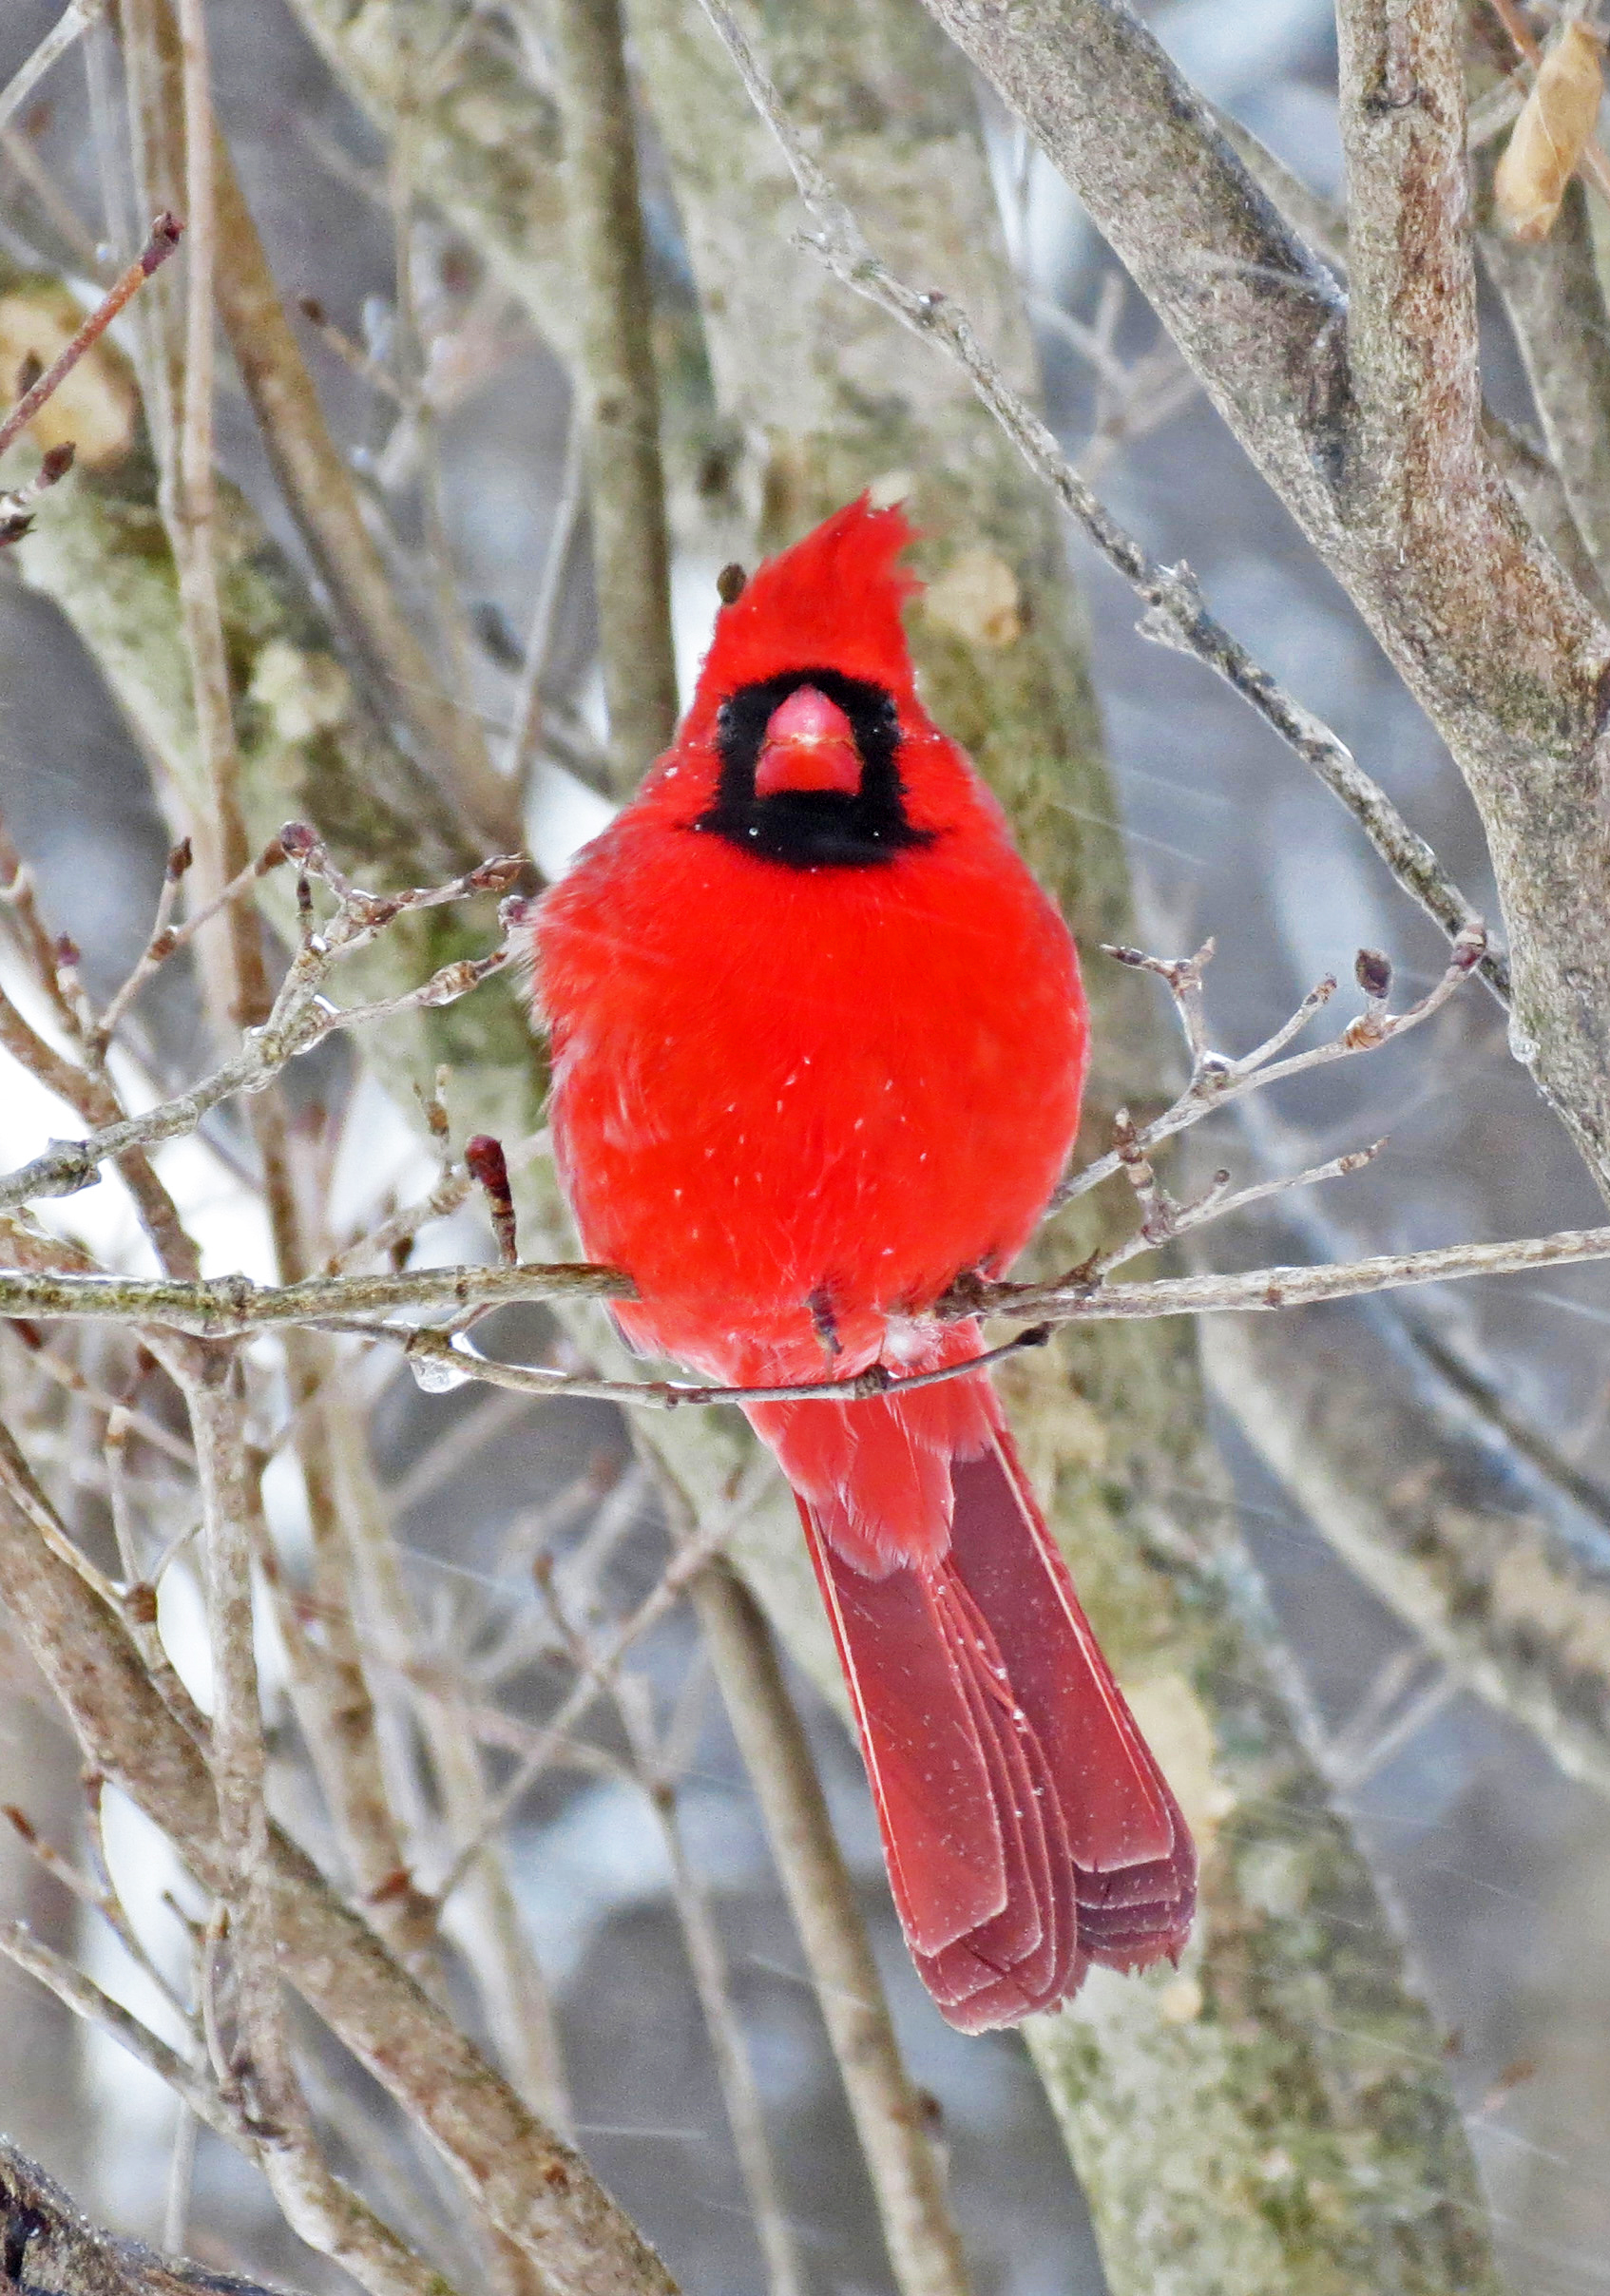 Northern cardinals have a short, stout bill, adapted for cracking seeds. This species is the only bright red bird with a crest.